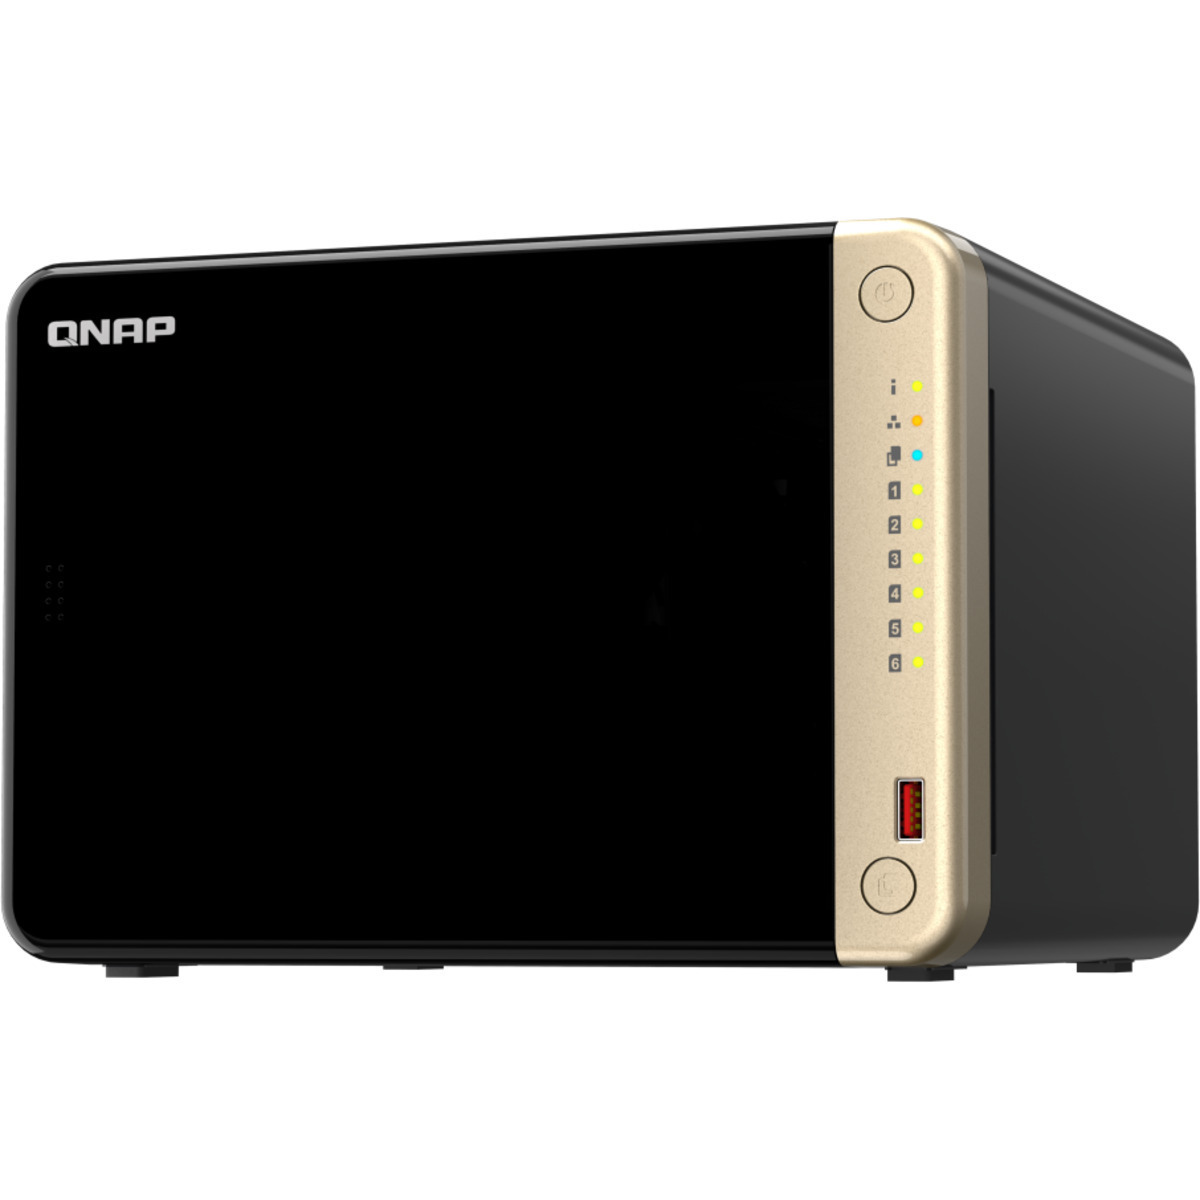 QNAP TS-664 132tb 6-Bay Desktop Multimedia / Power User / Business NAS - Network Attached Storage Device 6x22tb Western Digital Ultrastar HC580 WUH722422ALE6L4 3.5 7200rpm SATA 6Gb/s HDD ENTERPRISE Class Drives Installed - Burn-In Tested TS-664